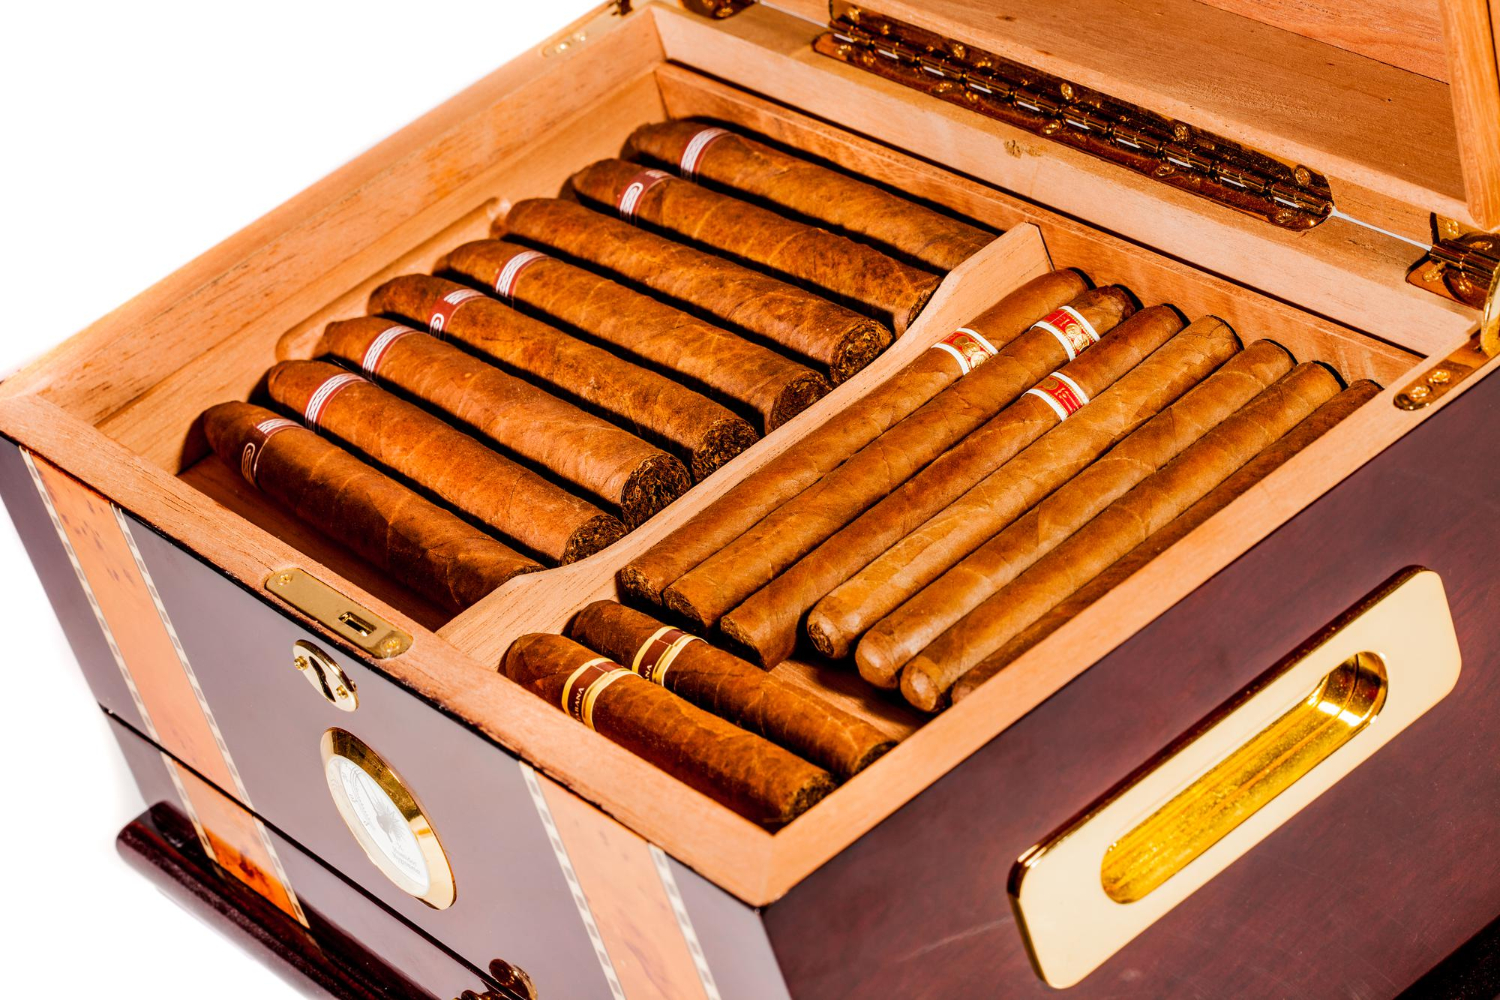 Cigars properly stored in a humidor